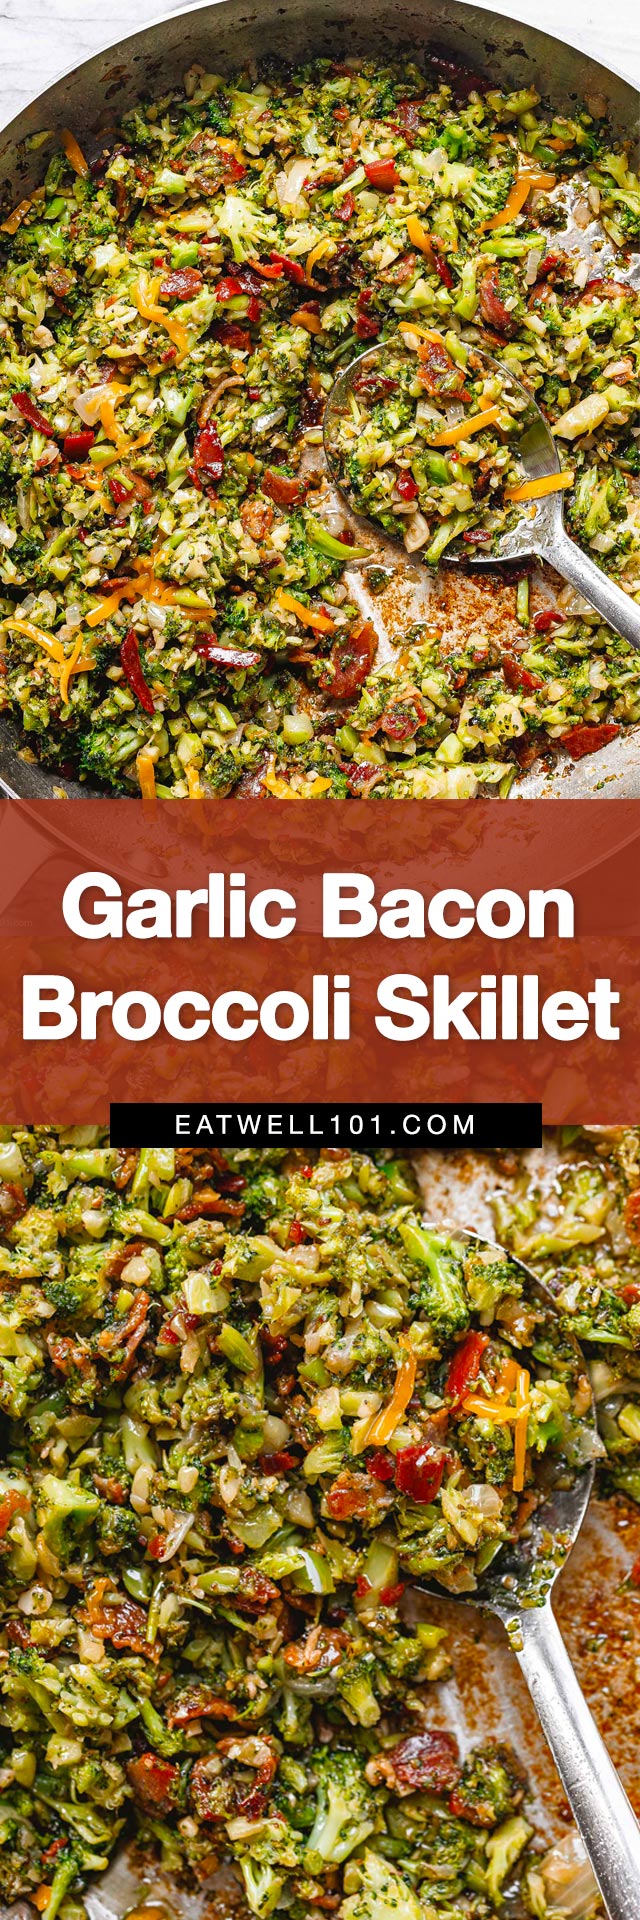 Garlic Bacon Broccoli Skillet Recipe - #broccoli #bacon #eatwell101 #recipe - This Garlic Bacon Broccoli Skillet makes for a quick and flavorful side dish. 